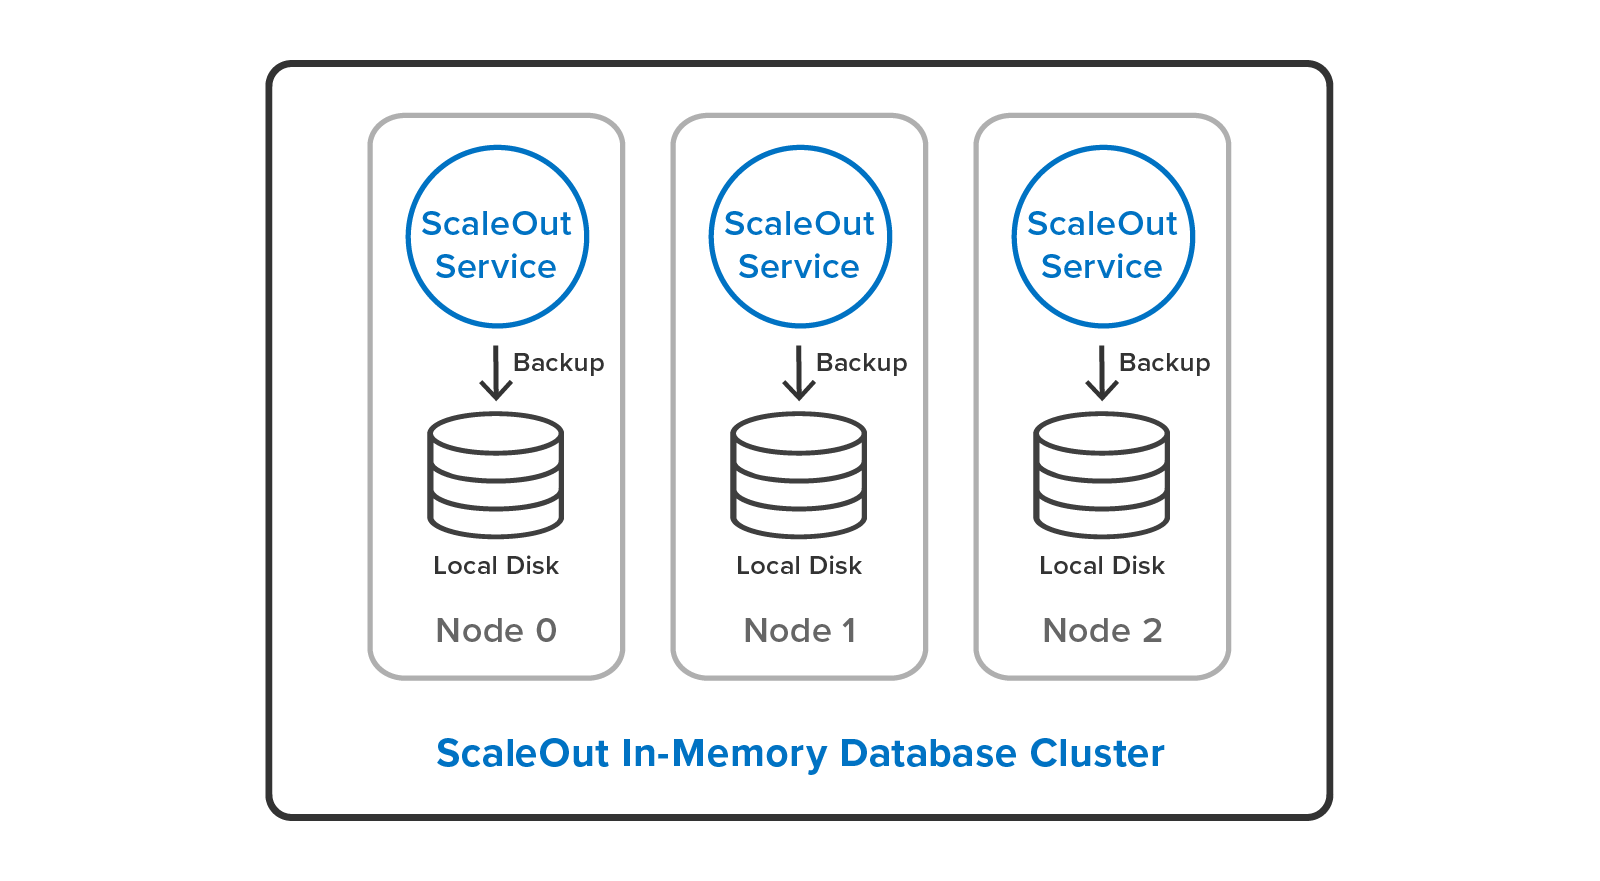 ScaleOut In-Memory Database provides one-touch, fully parallel backup of the database.